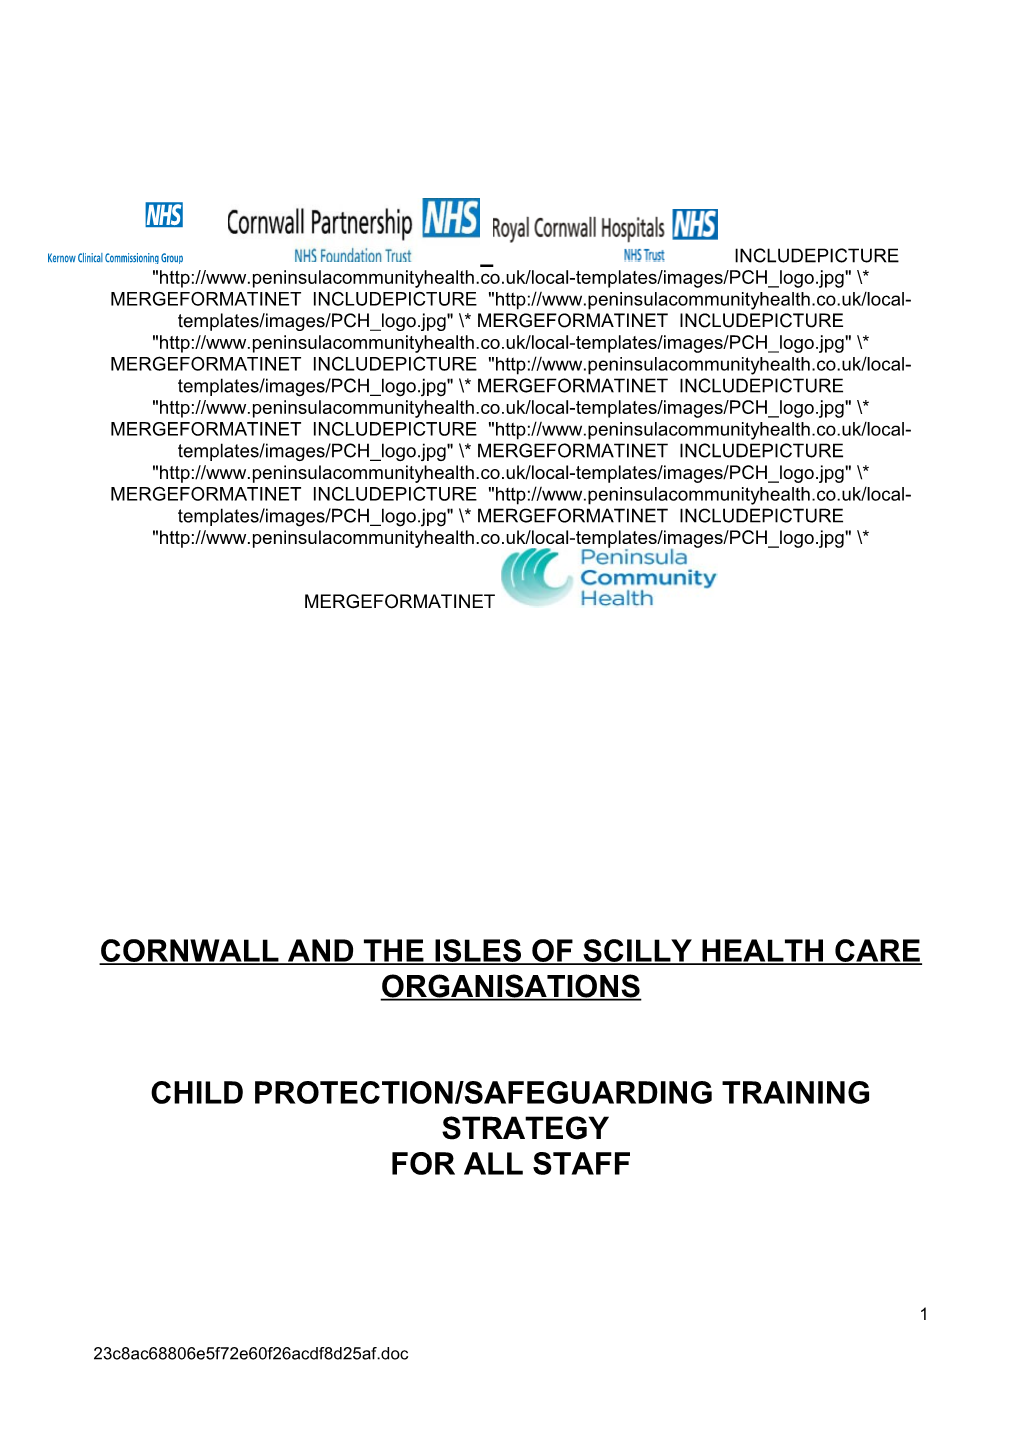 Somerset PCT Child Protection Training Strategy